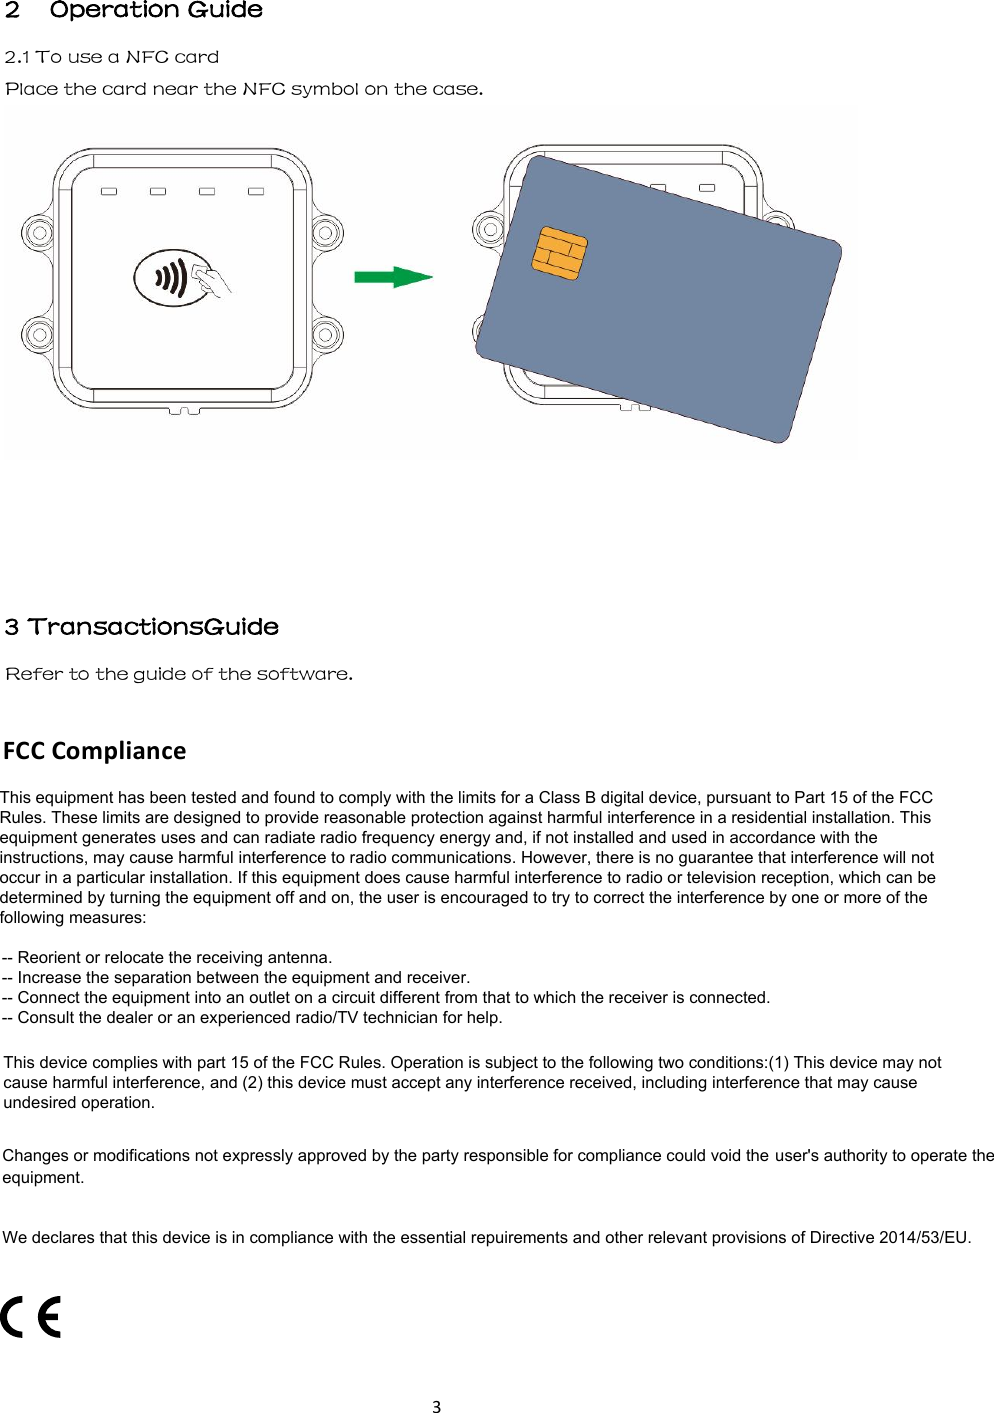 3 2    Operation Guide 2.1 To use a NFC card   Place the card near the NFC symbol on the case. 3 TransactionsGuideRefer to the guide of the software. FCC Compliance This equipment has been tested and found to comply with the limits for a Class B digital device, pursuant to Part 15 of the FCC Rules. These limits are designed to provide reasonable protection against harmful interference in a residential installation. This equipment generates uses and can radiate radio frequency energy and, if not installed and used in accordance with the instructions, may cause harmful interference to radio communications. However, there is no guarantee that interference will not occur in a particular installation. If this equipment does cause harmful interference to radio or television reception, which can be determined by turning the equipment off and on, the user is encouraged to try to correct the interference by one or more of the following measures:-- Reorient or relocate the receiving antenna.  -- Increase the separation between the equipment and receiver.   -- Connect the equipment into an outlet on a circuit different from that to which the receiver is connected.  -- Consult the dealer or an experienced radio/TV technician for help.This device complies with part 15 of the FCC Rules. Operation is subject to the following two conditions:(1) This device may not cause harmful interference, and (2) this device must accept any interference received, including interference that may cause undesired operation.Changes or modifications not expressly approved by the party responsible for compliance could void the user&apos;s authority to operate the equipment.We declares that this device is in compliance with the essential repuirements and other relevant provisions of Directive 2014/53/EU.